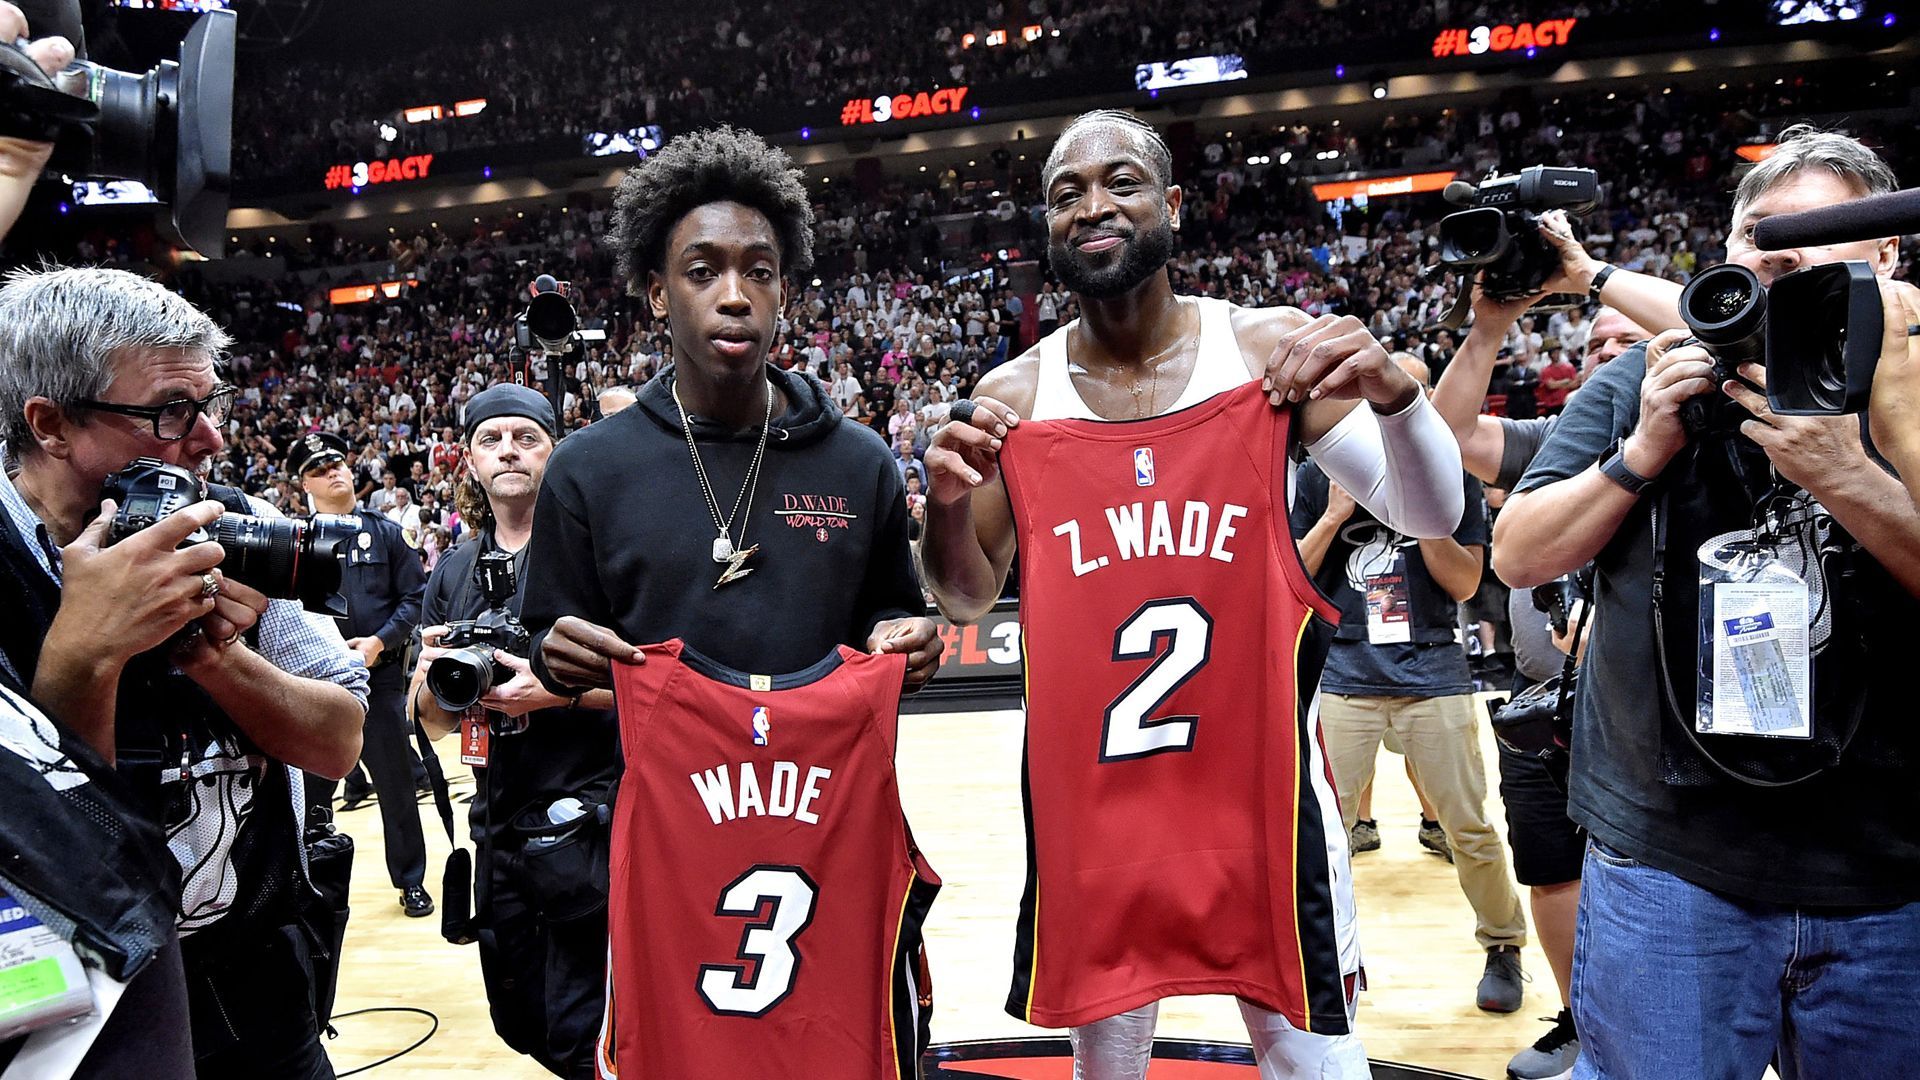 Dwyane Wade frustrated about son's playing time during high school title game